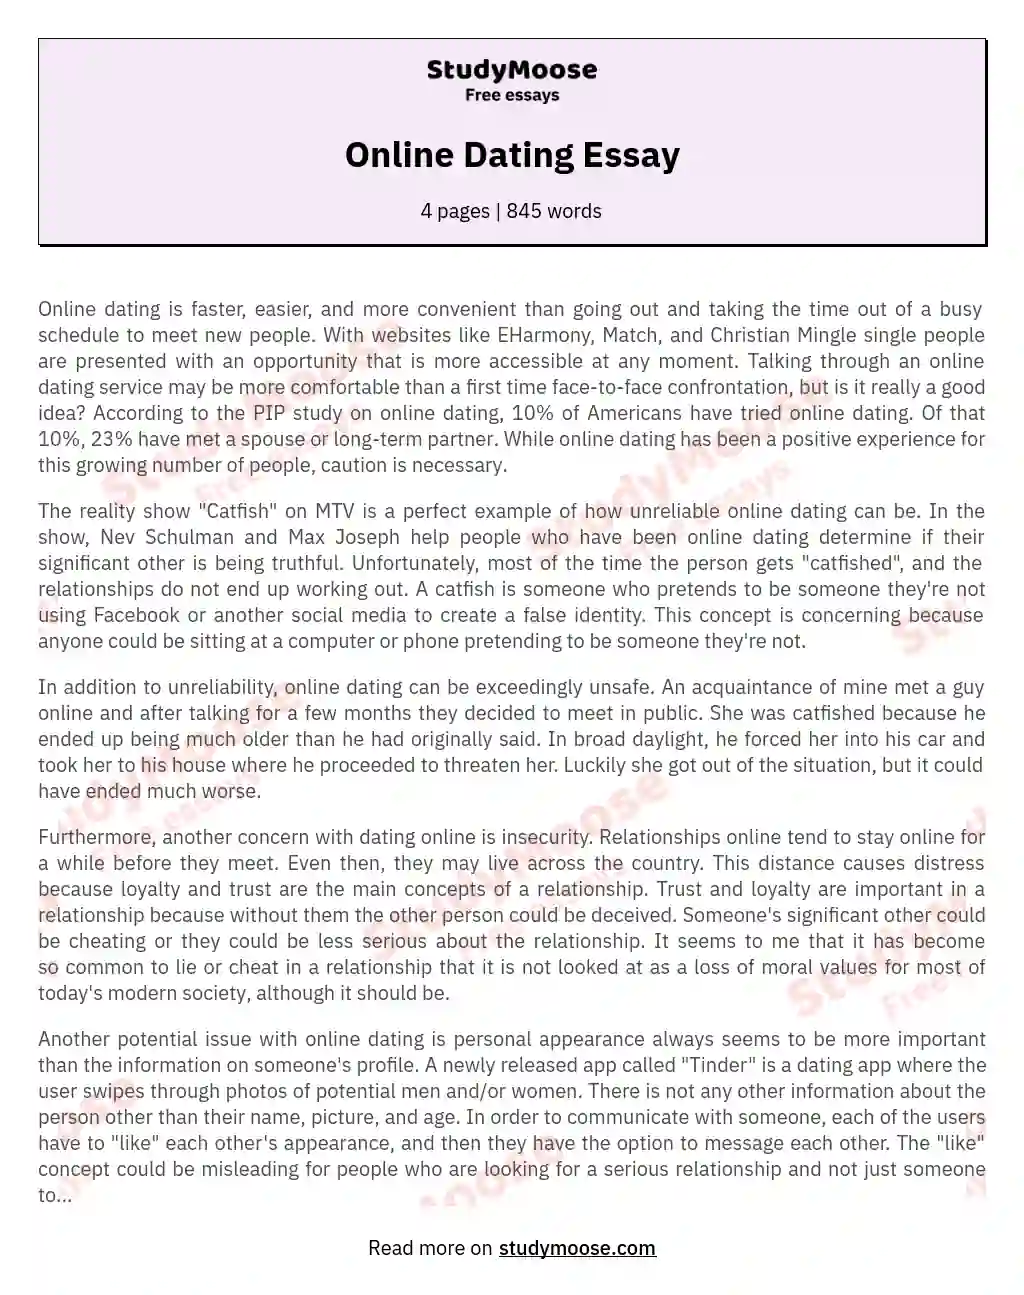 the effect of online dating essay